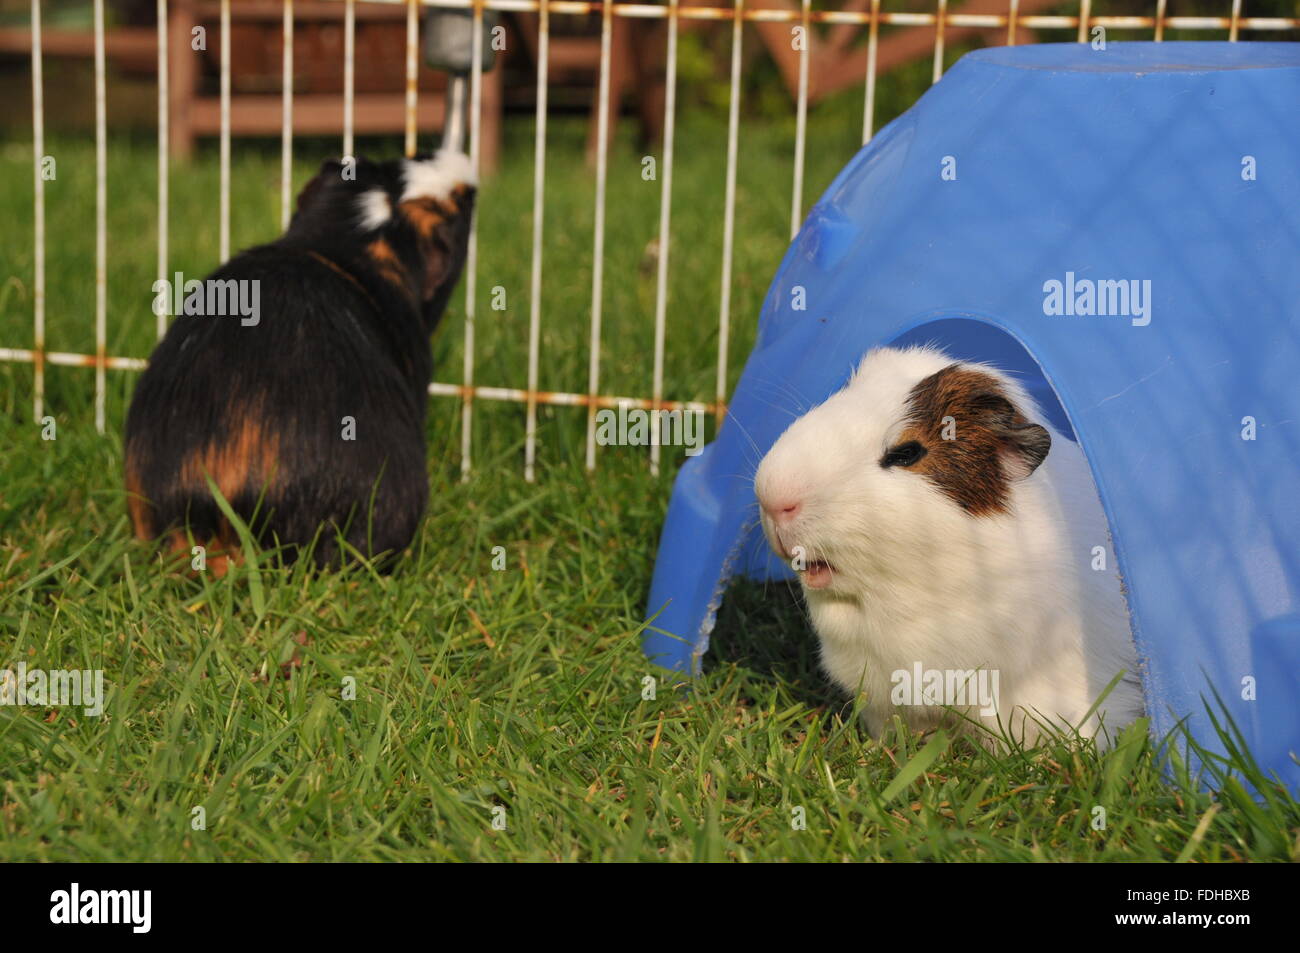 guinea pigs in an outdoor enclosure with one sheltering under a plastic shelter. Stock Photo